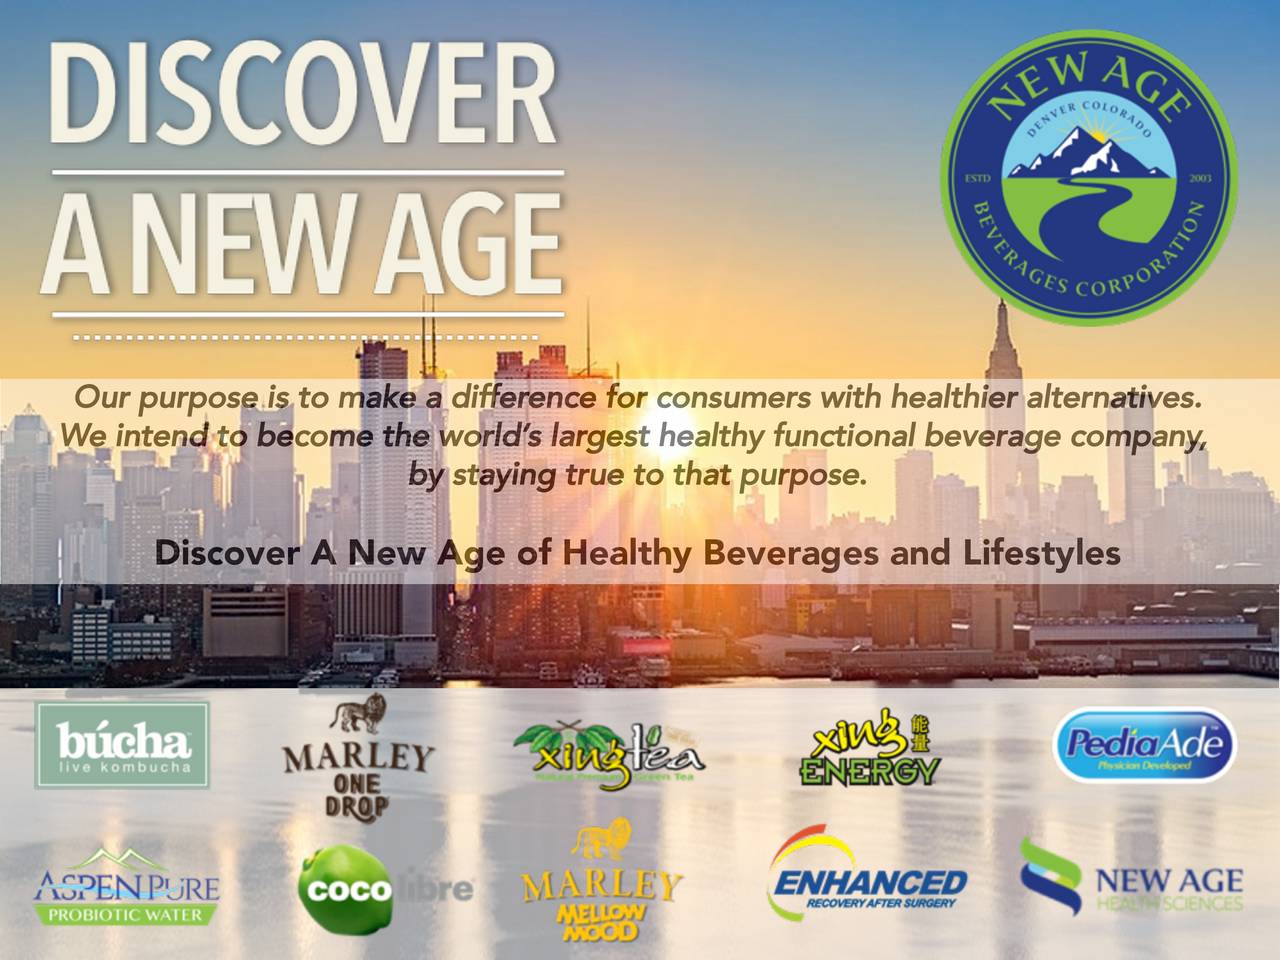 New Age Beverages Nbev Presents At Rodman Renshaw 19th Annual